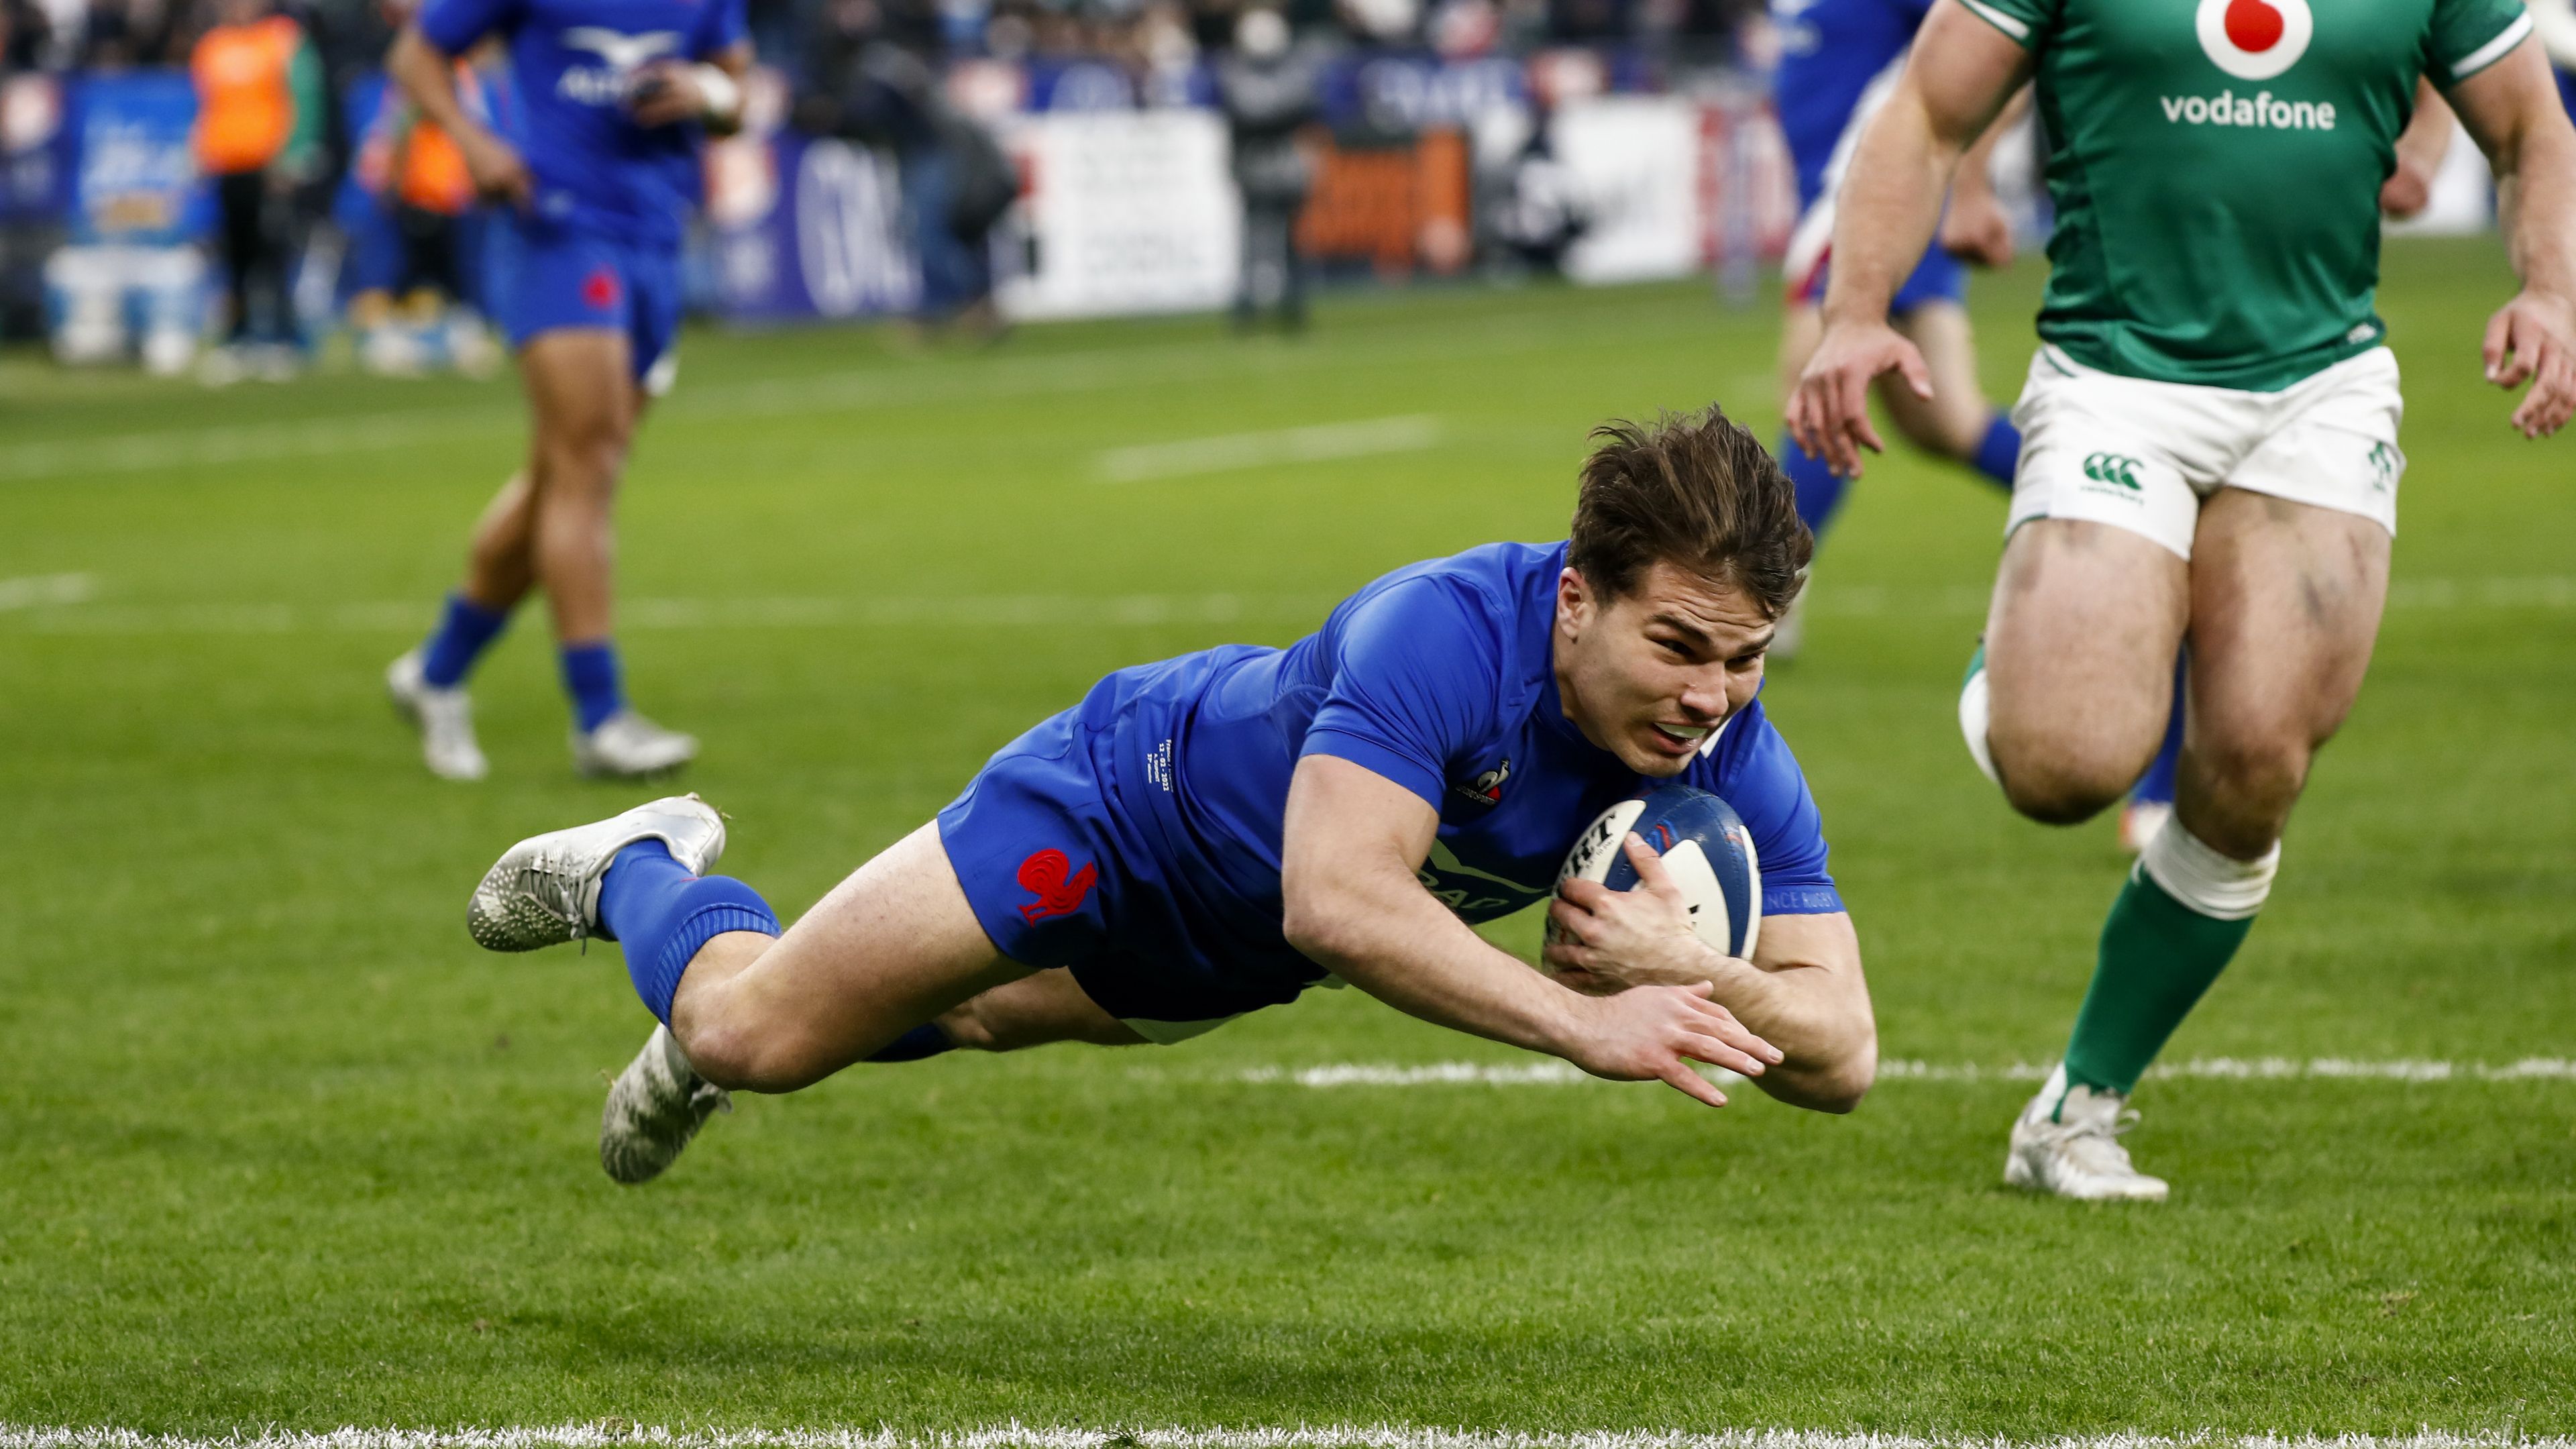 France dreaming of Six Nations title after ending Ireland's win streak